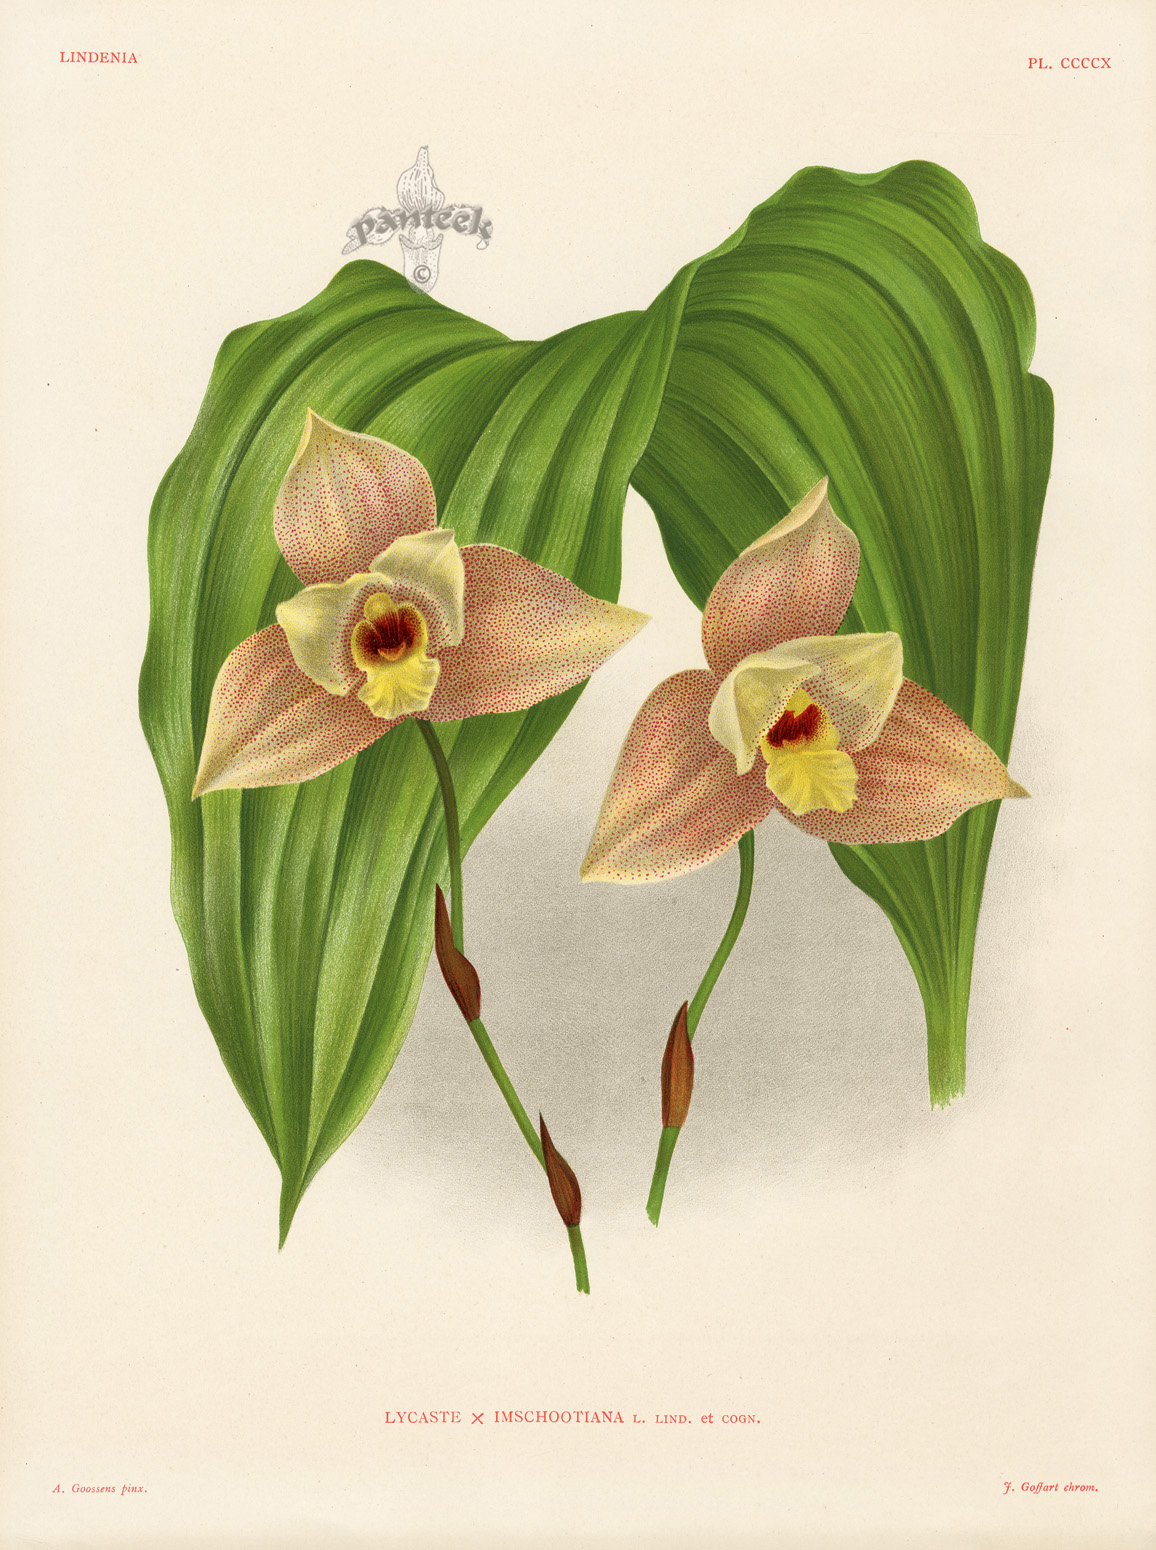 Lycaste Imschootiana from Linden Orchid Prints Lindenia 1885